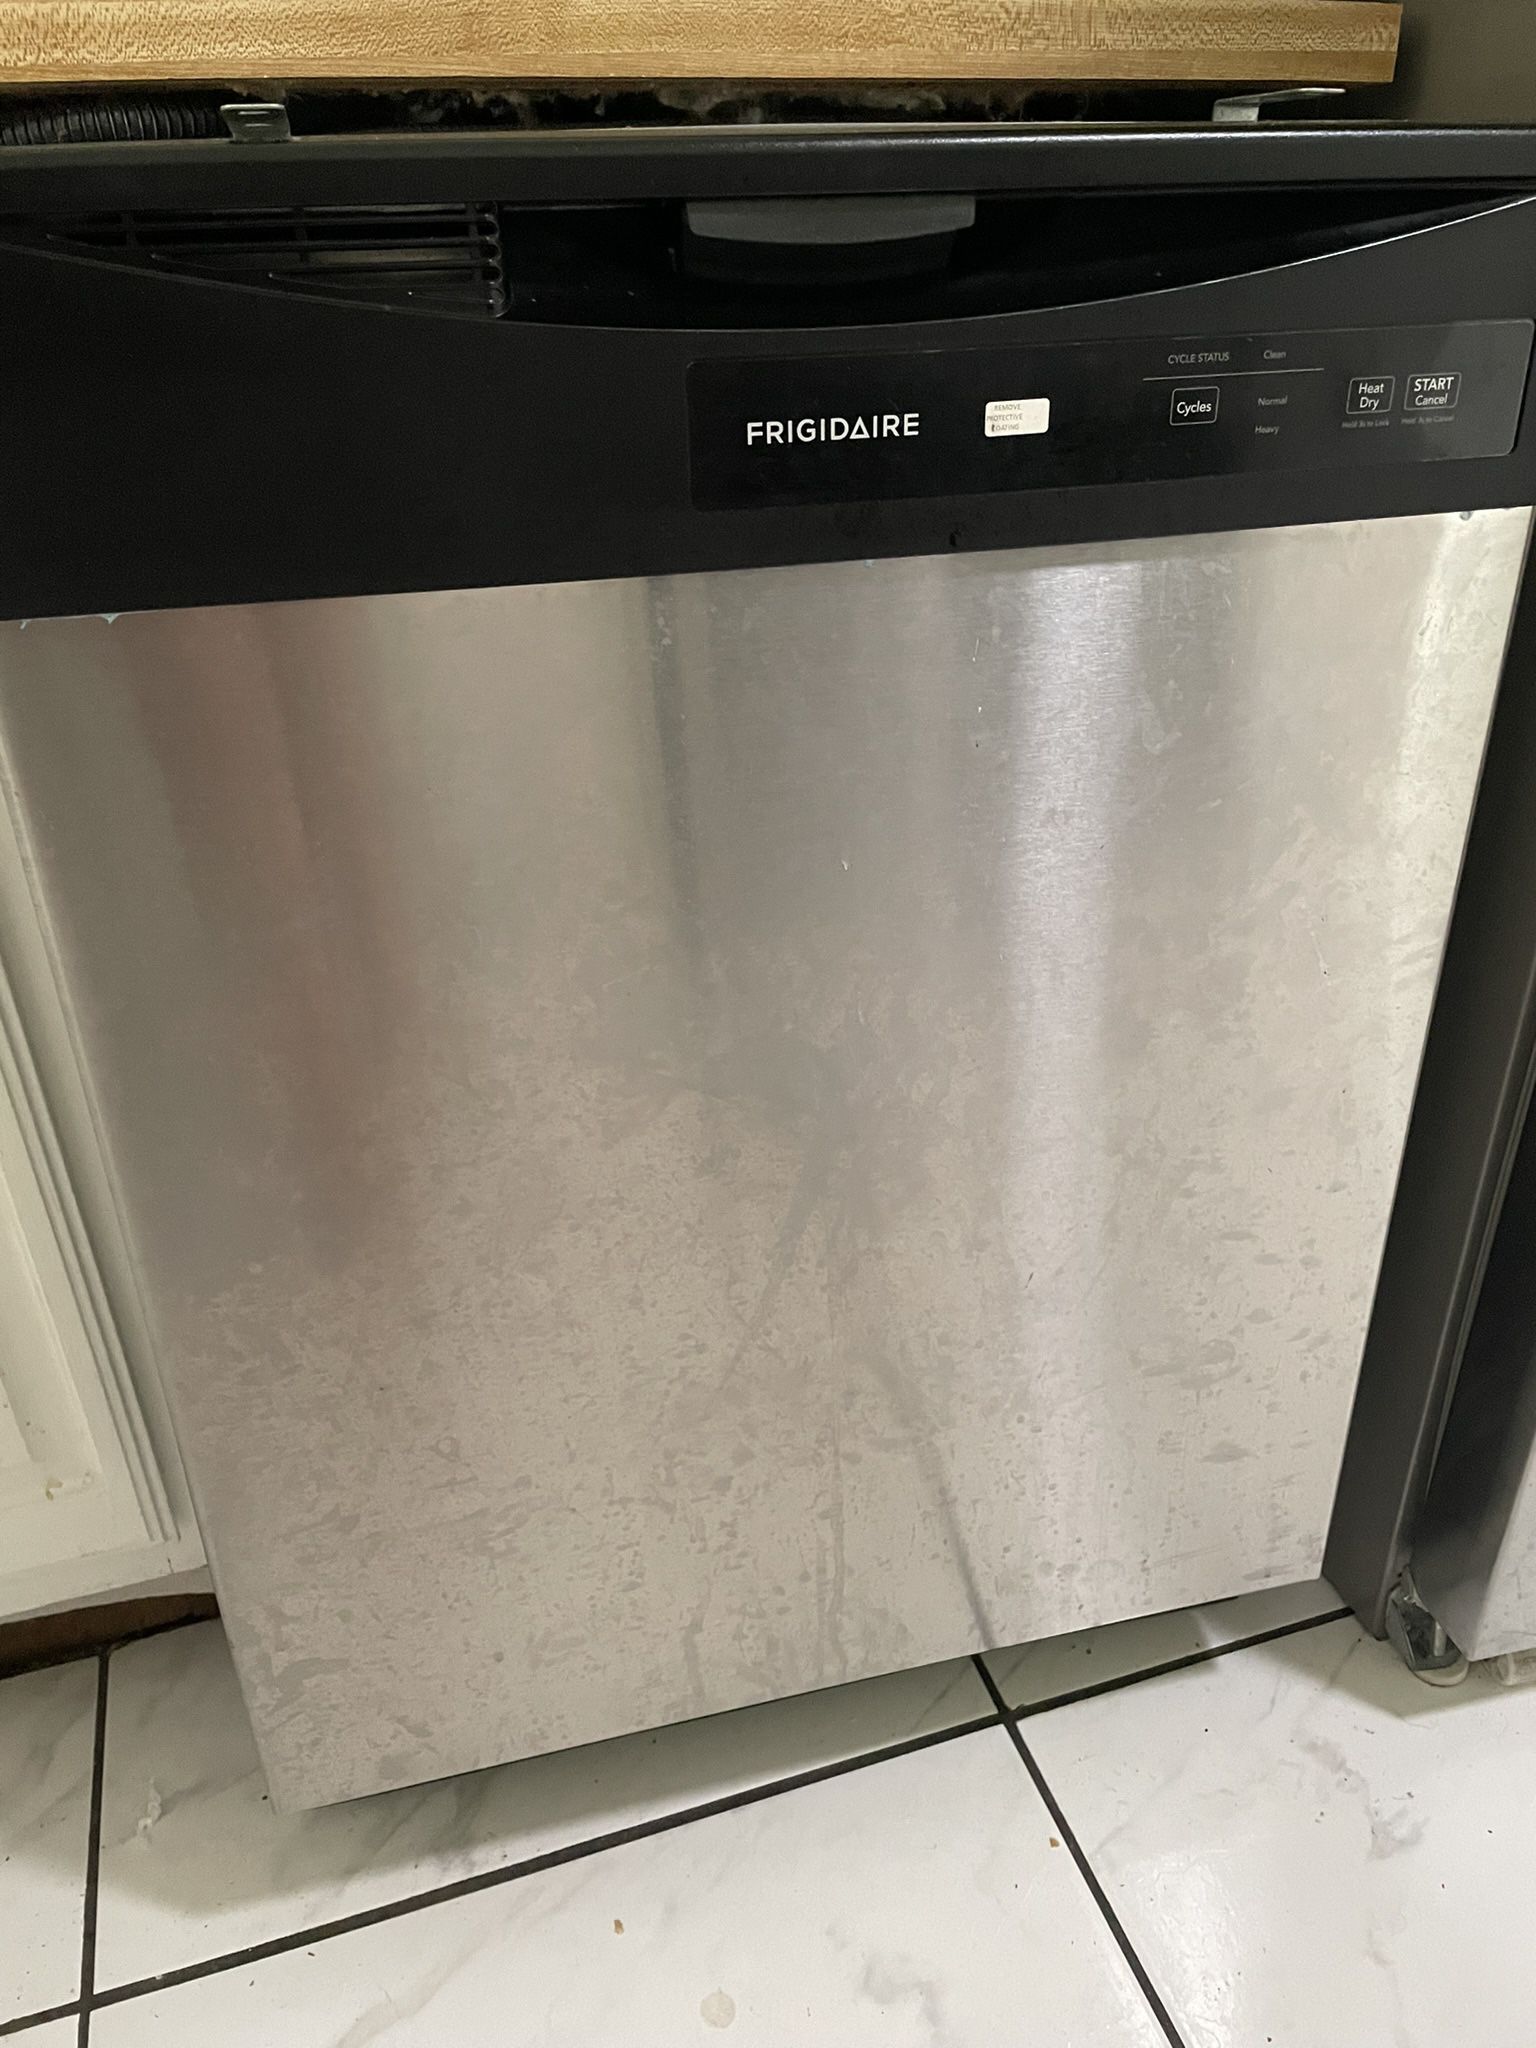 Dish Washer For Sale 